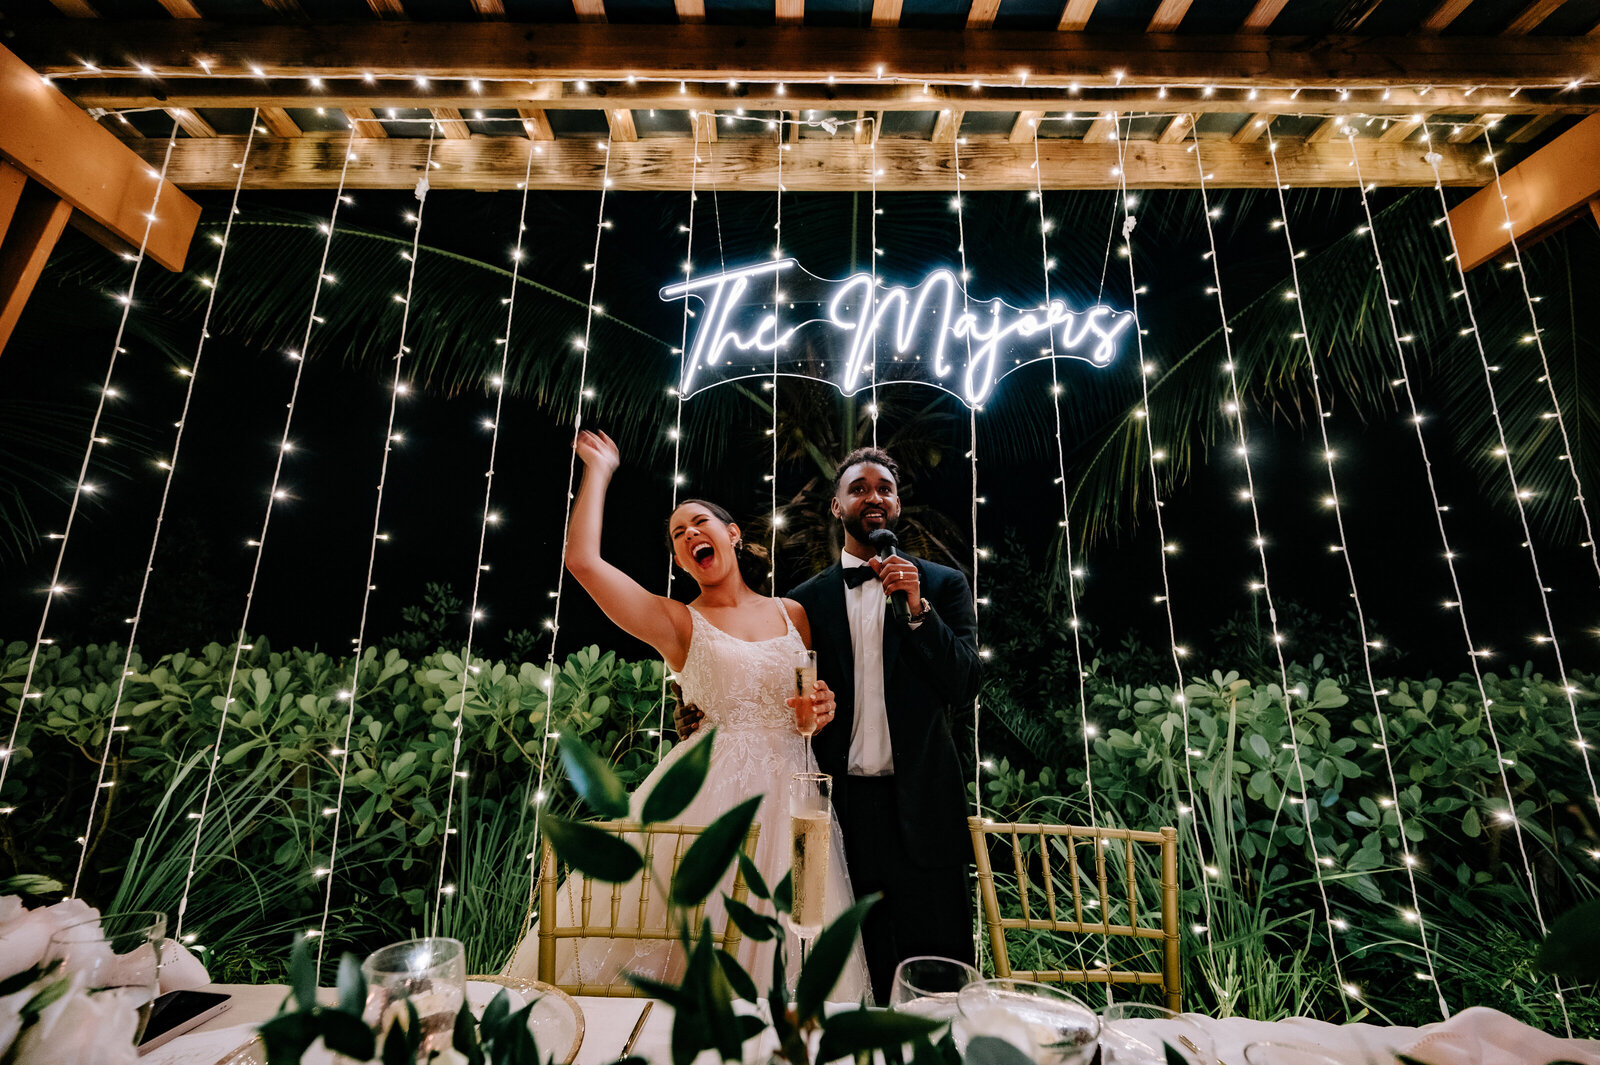 Bride and groom taosting under neon sign